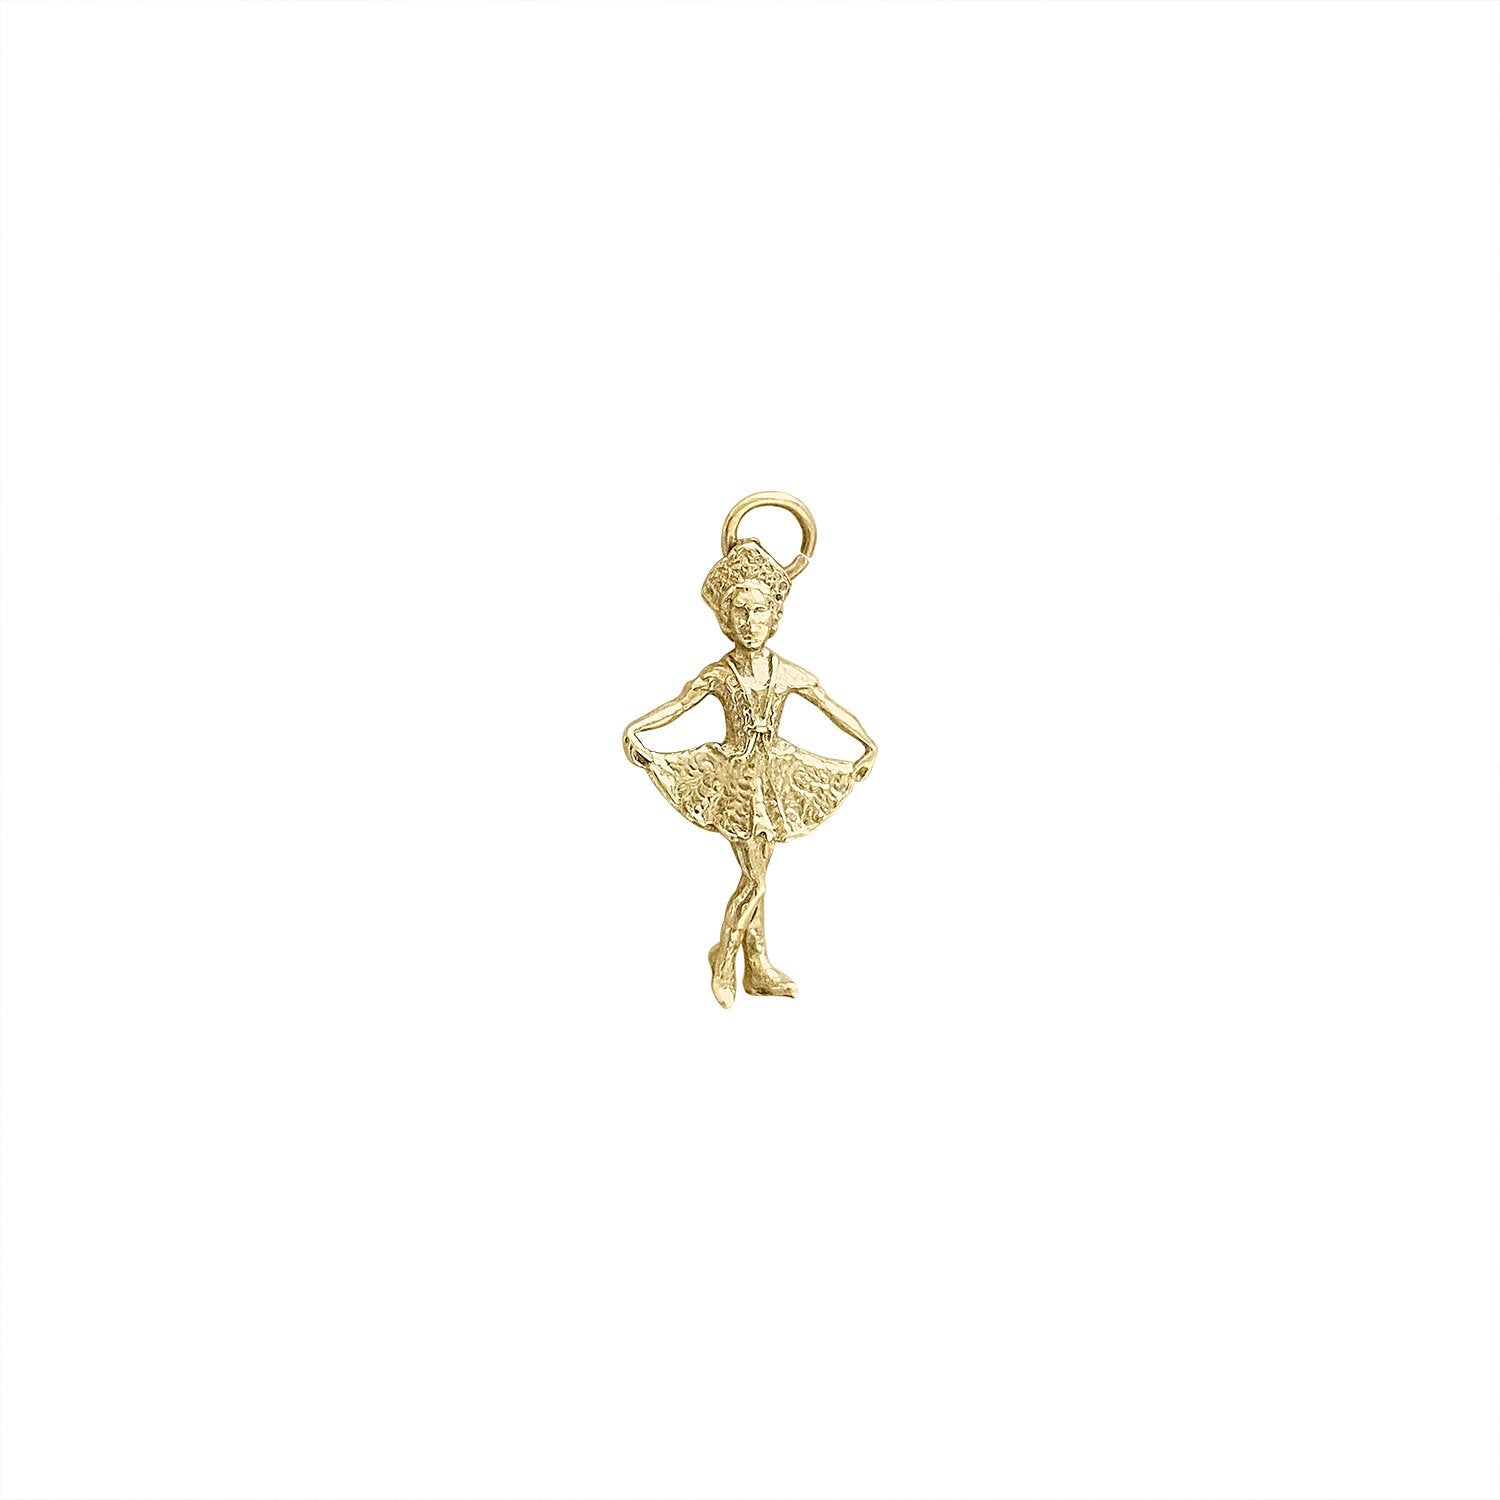 Vintage Traditional Dancer Charm by Fewer Finer